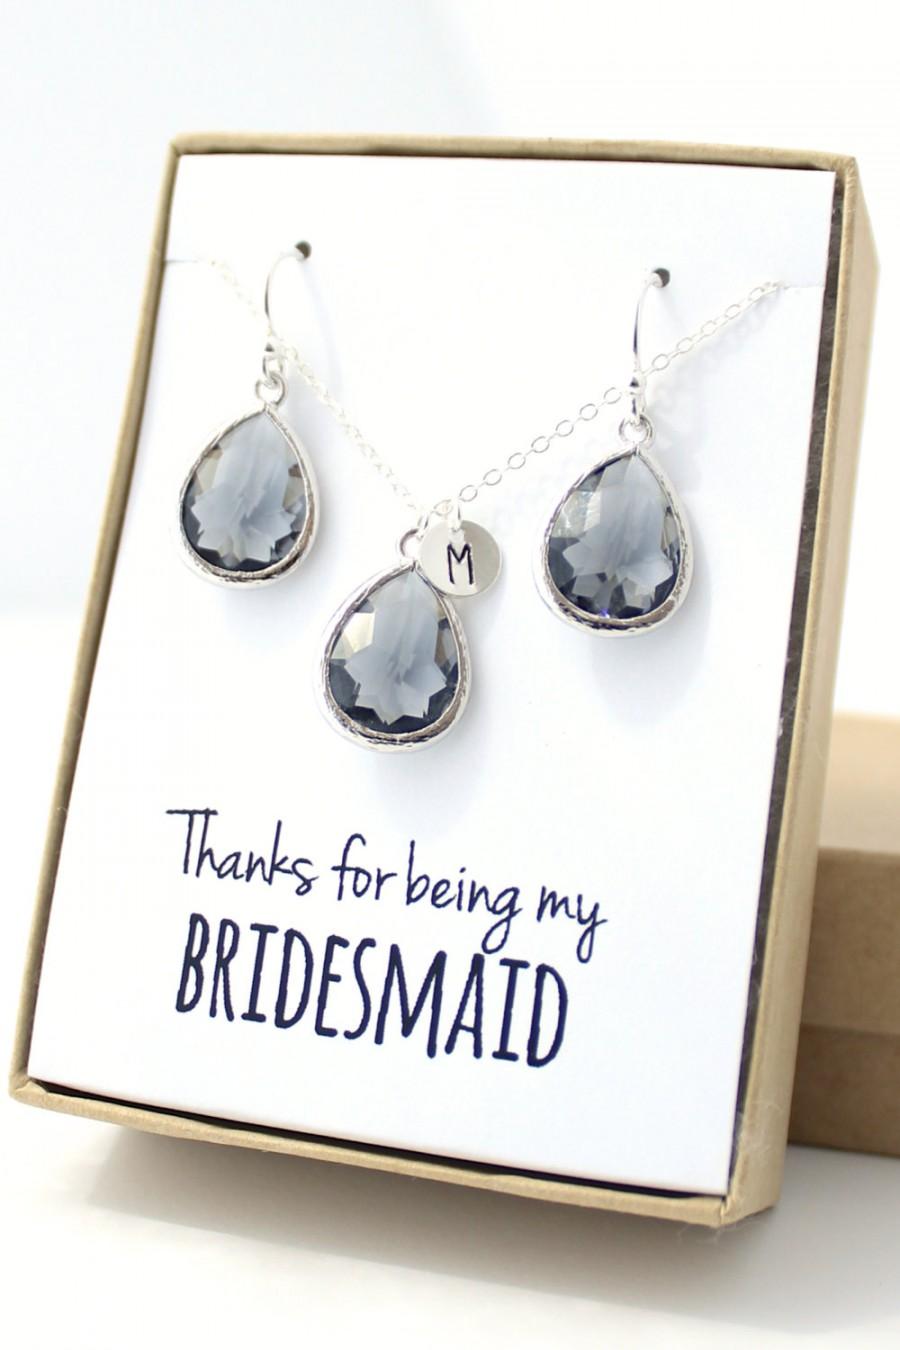 Mariage - Charcoal Gray / Silver Teardrop Necklace and Earring Set - Bridesmaid Gift - Charcoal Bridesmaid Set - Bridesmaid Jewelry Set - ENB1